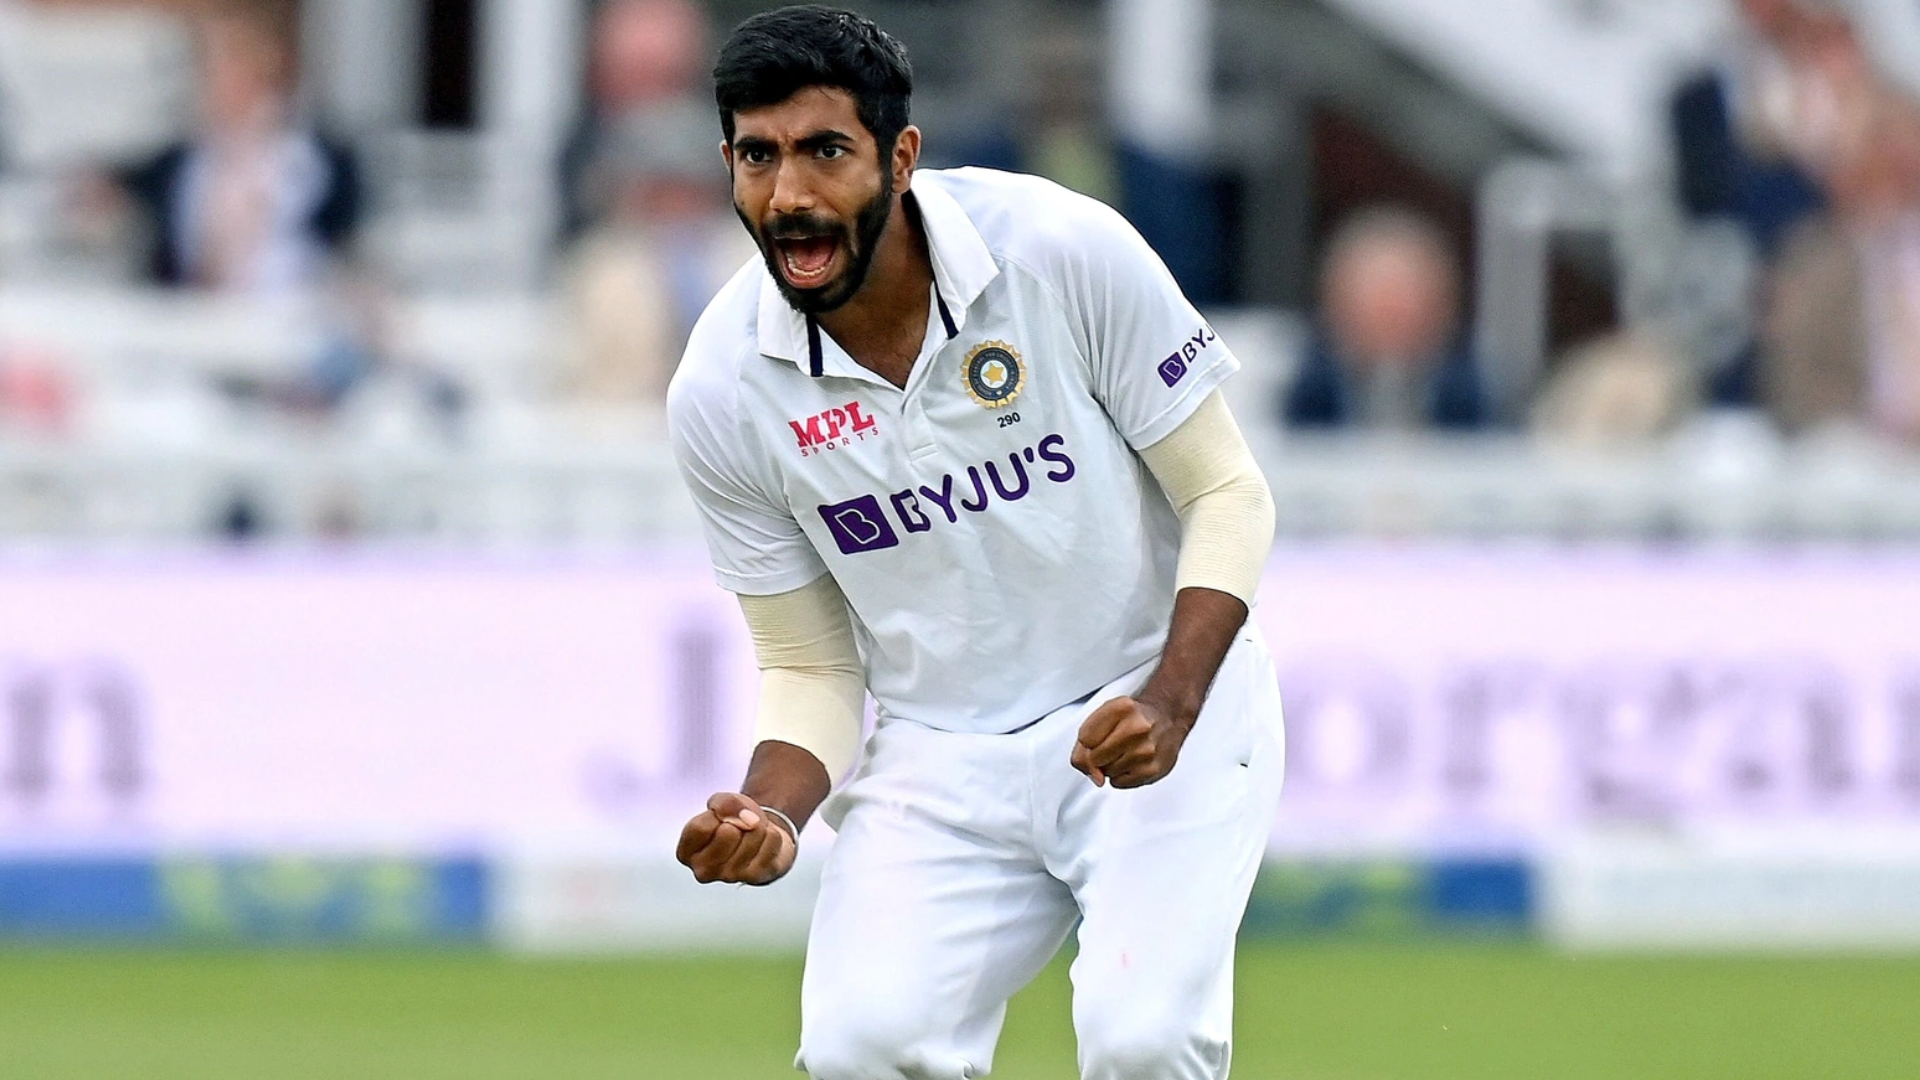 IND vs ENG, 4th Test: This Bowler Likely To Make Debut For India In The Absence Of Jasprit Bumrah